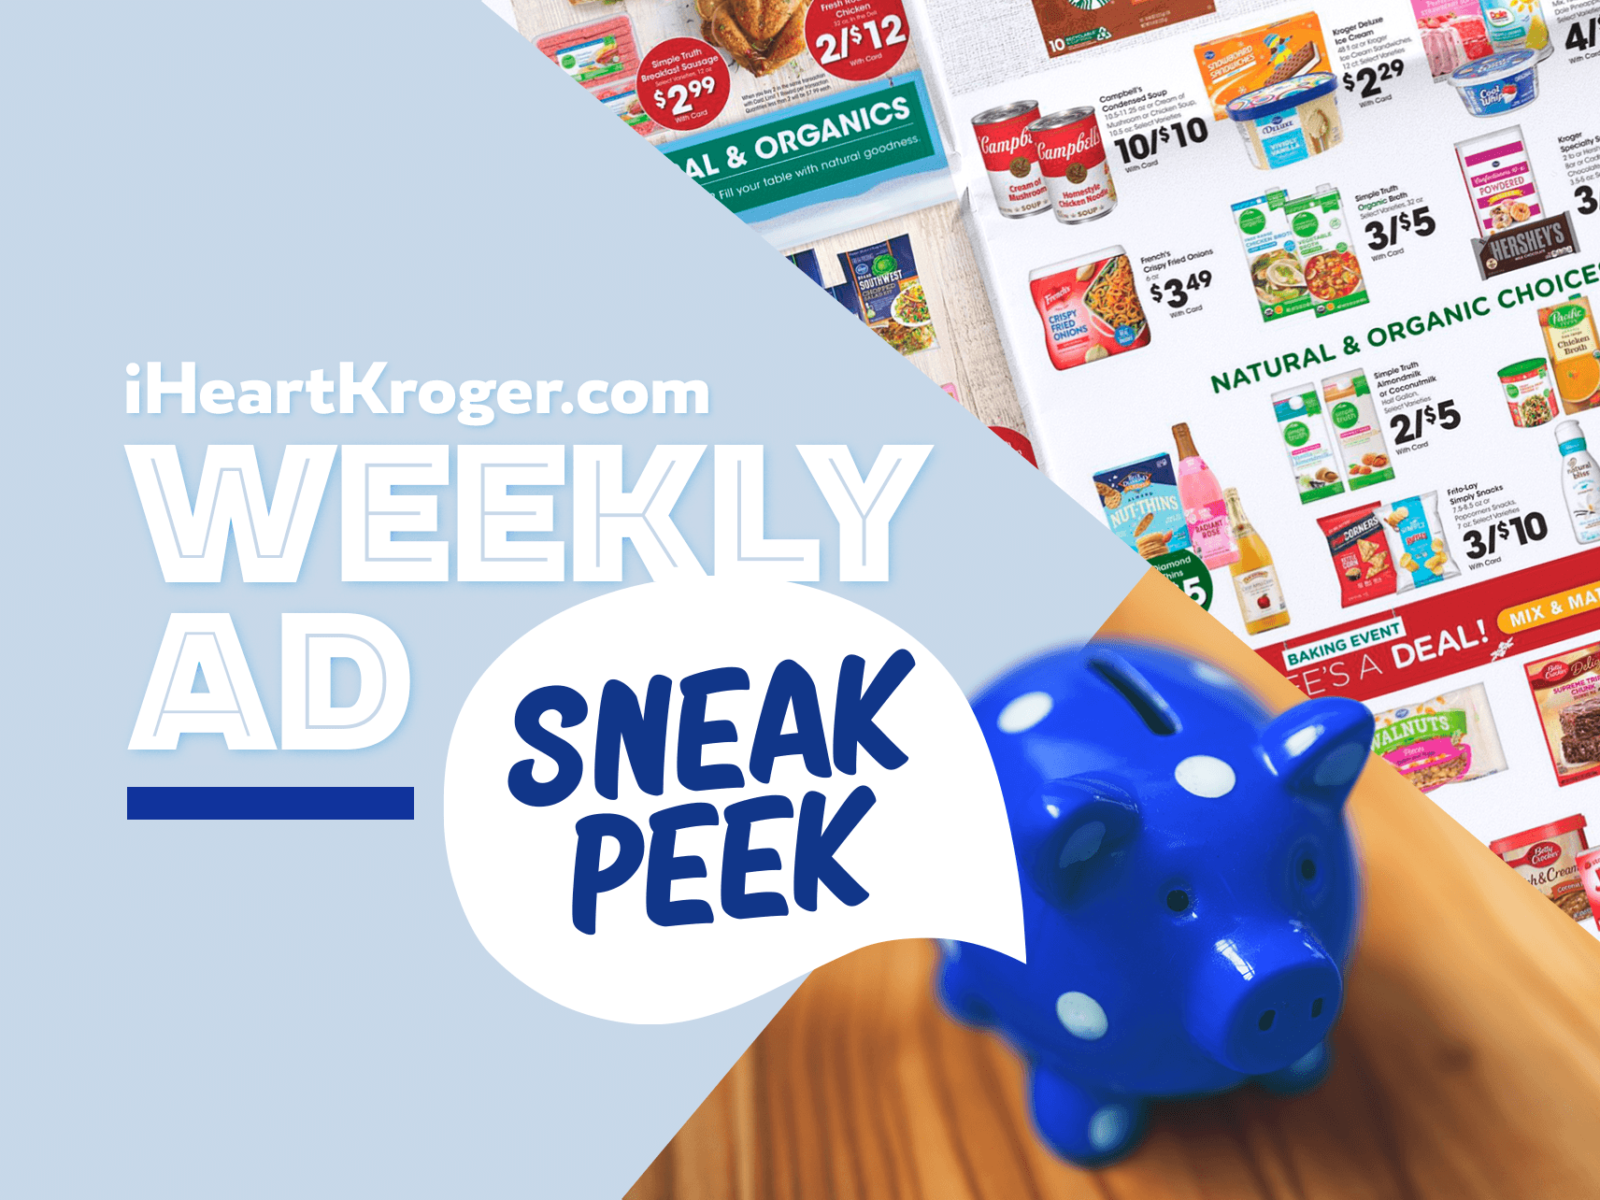 Kroger Ad & Coupons Week Of 3/22 to 3/28